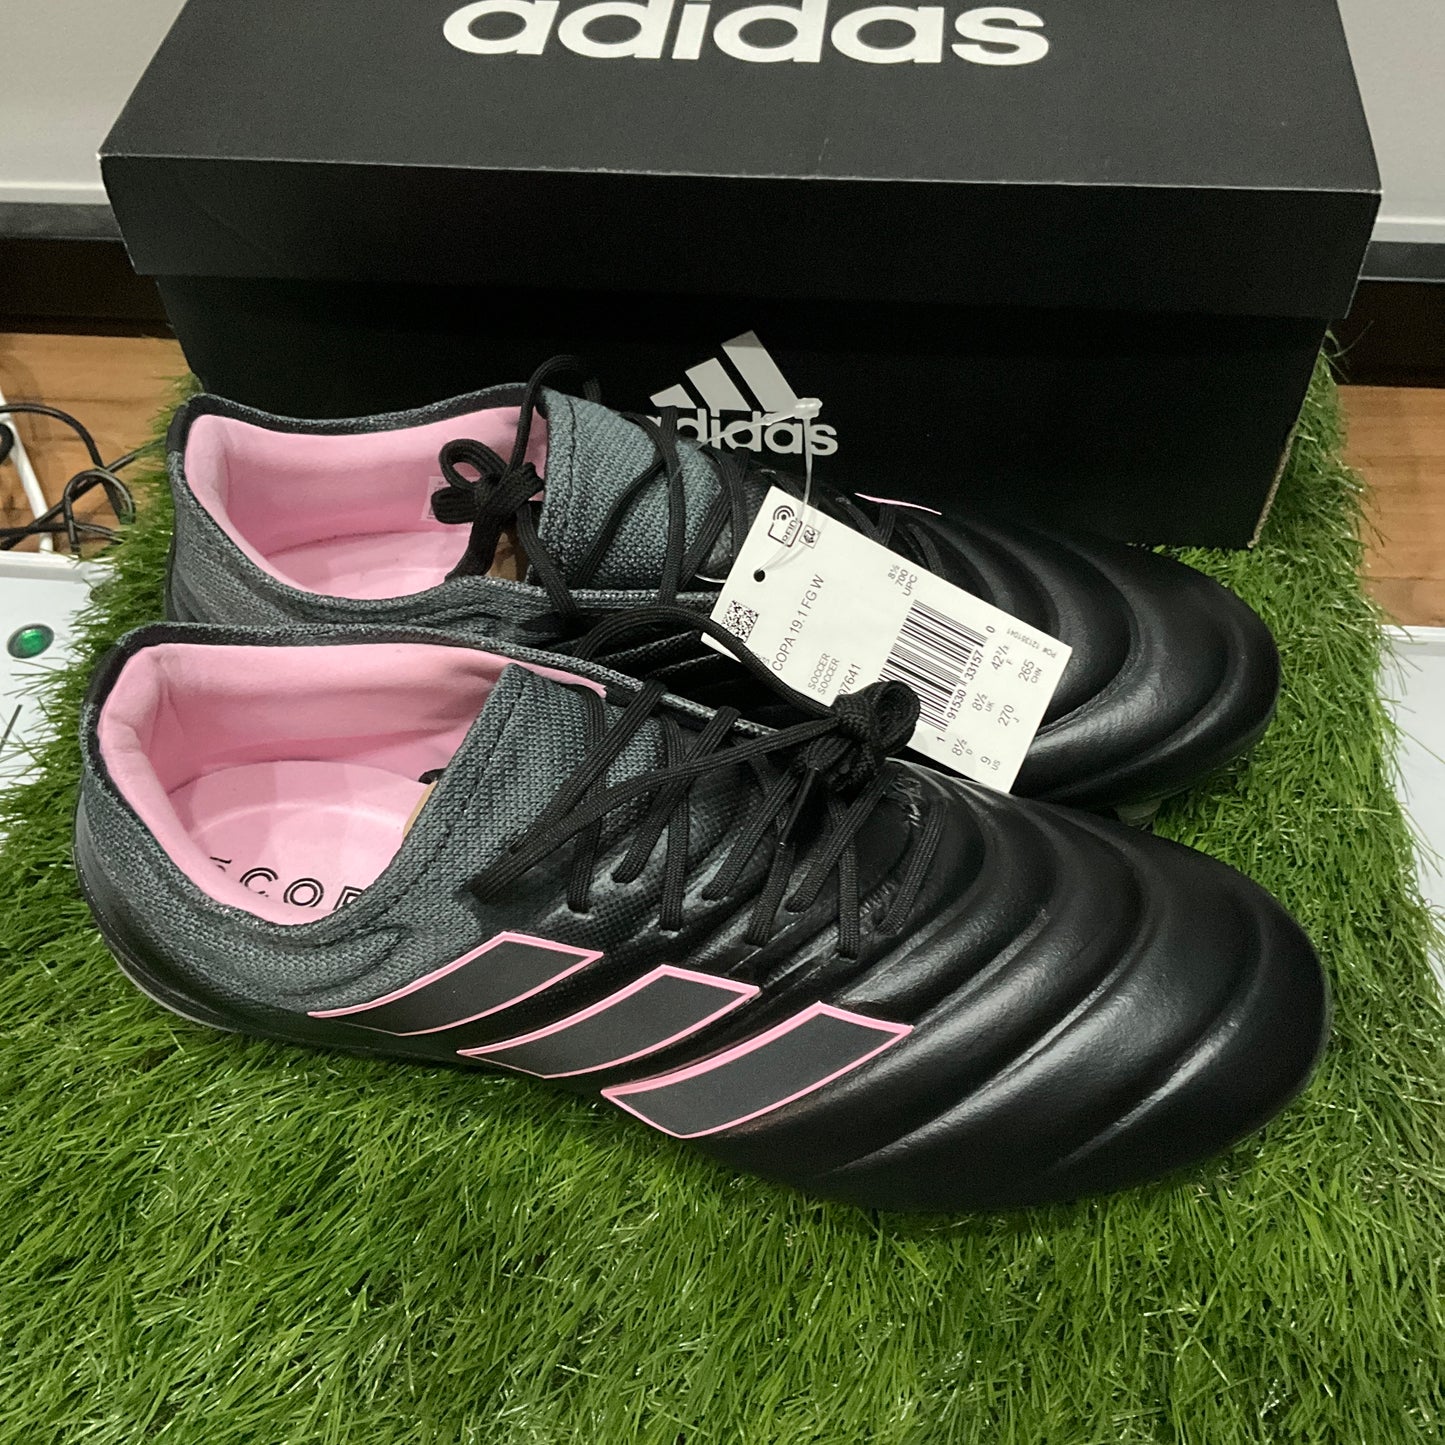 Not released in Japan COPA 19.1 FG Woman's F97641